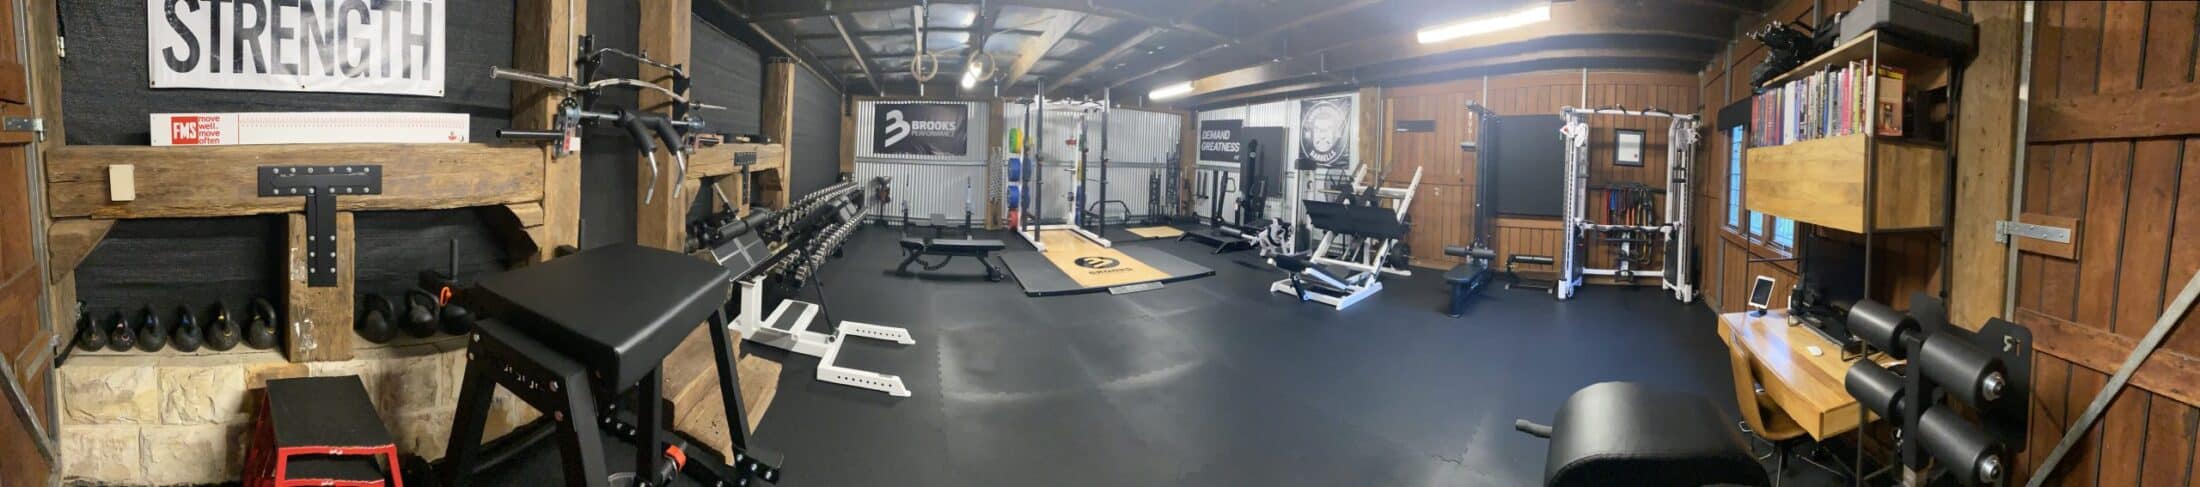 Picture of Personal Training Gym Brooks Performance, owned my personal trainer - Rhys Brooks. Offering world class personal training and online personal training in Sydney